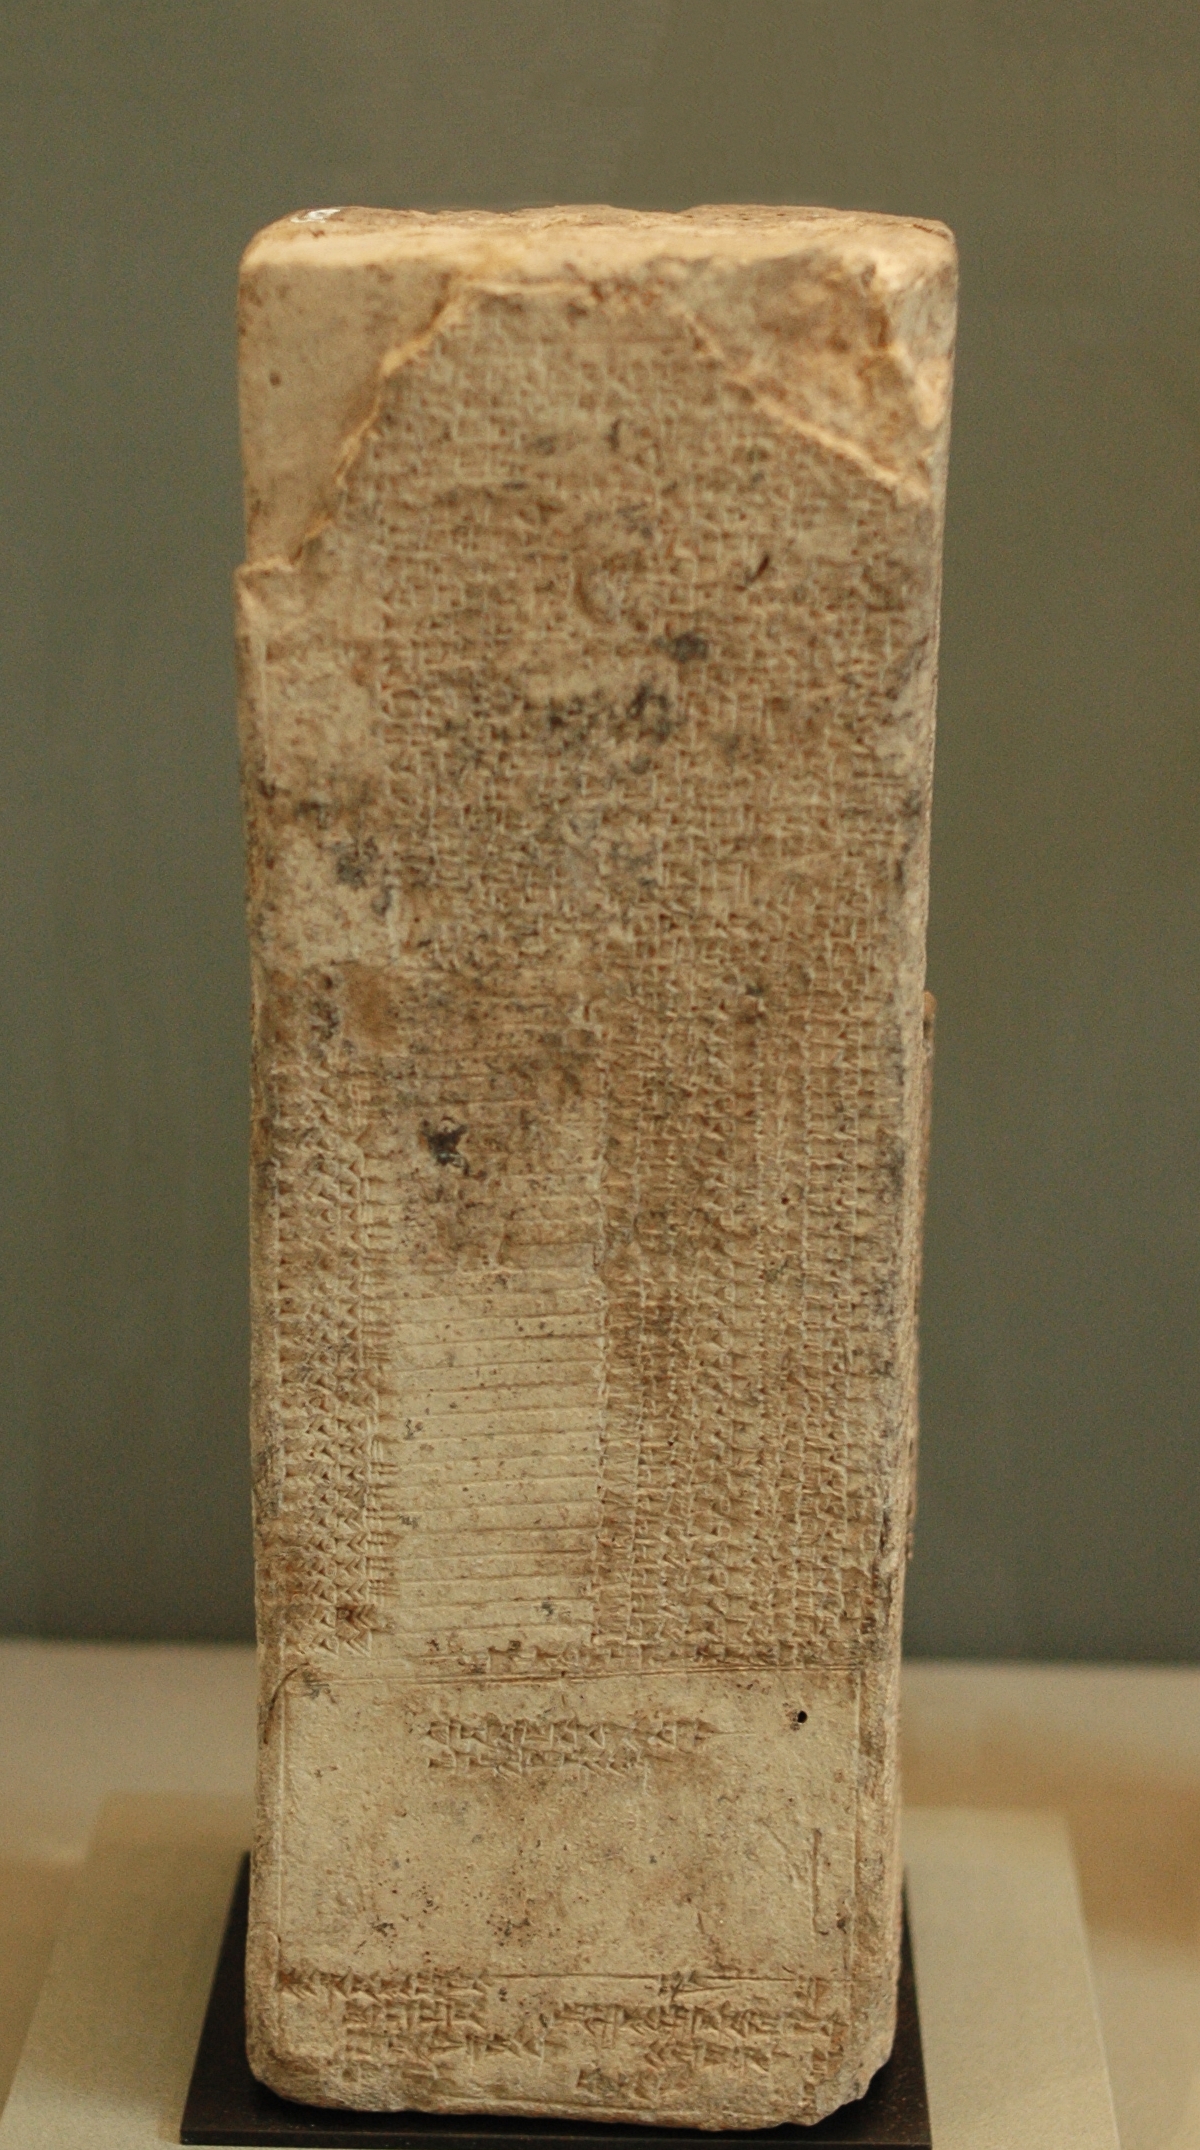 1aa - stela artifact, Babylonian Kings List, kingship was brought down from Heaven to Earth by Enlil, he created the position of power for their mixed-breed offspring, they were bigger, stronger, smarter, lived longer, & had the royal blood mix from the gods, they were well supported by them in every way